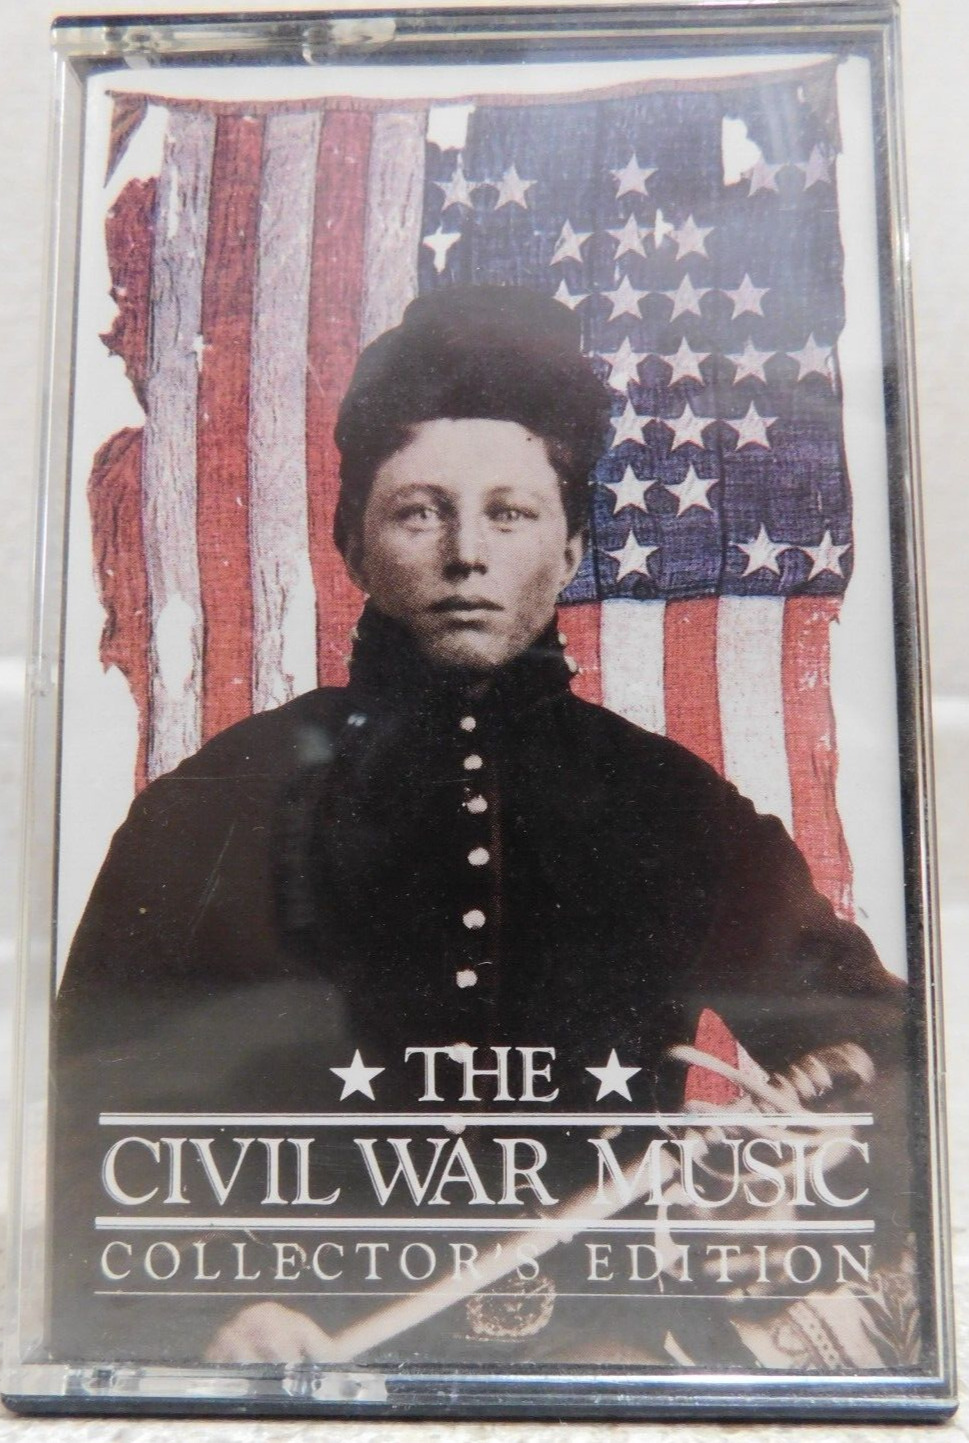 The Civil War Music Collectors Edition Time Life Music Cassette Tape 